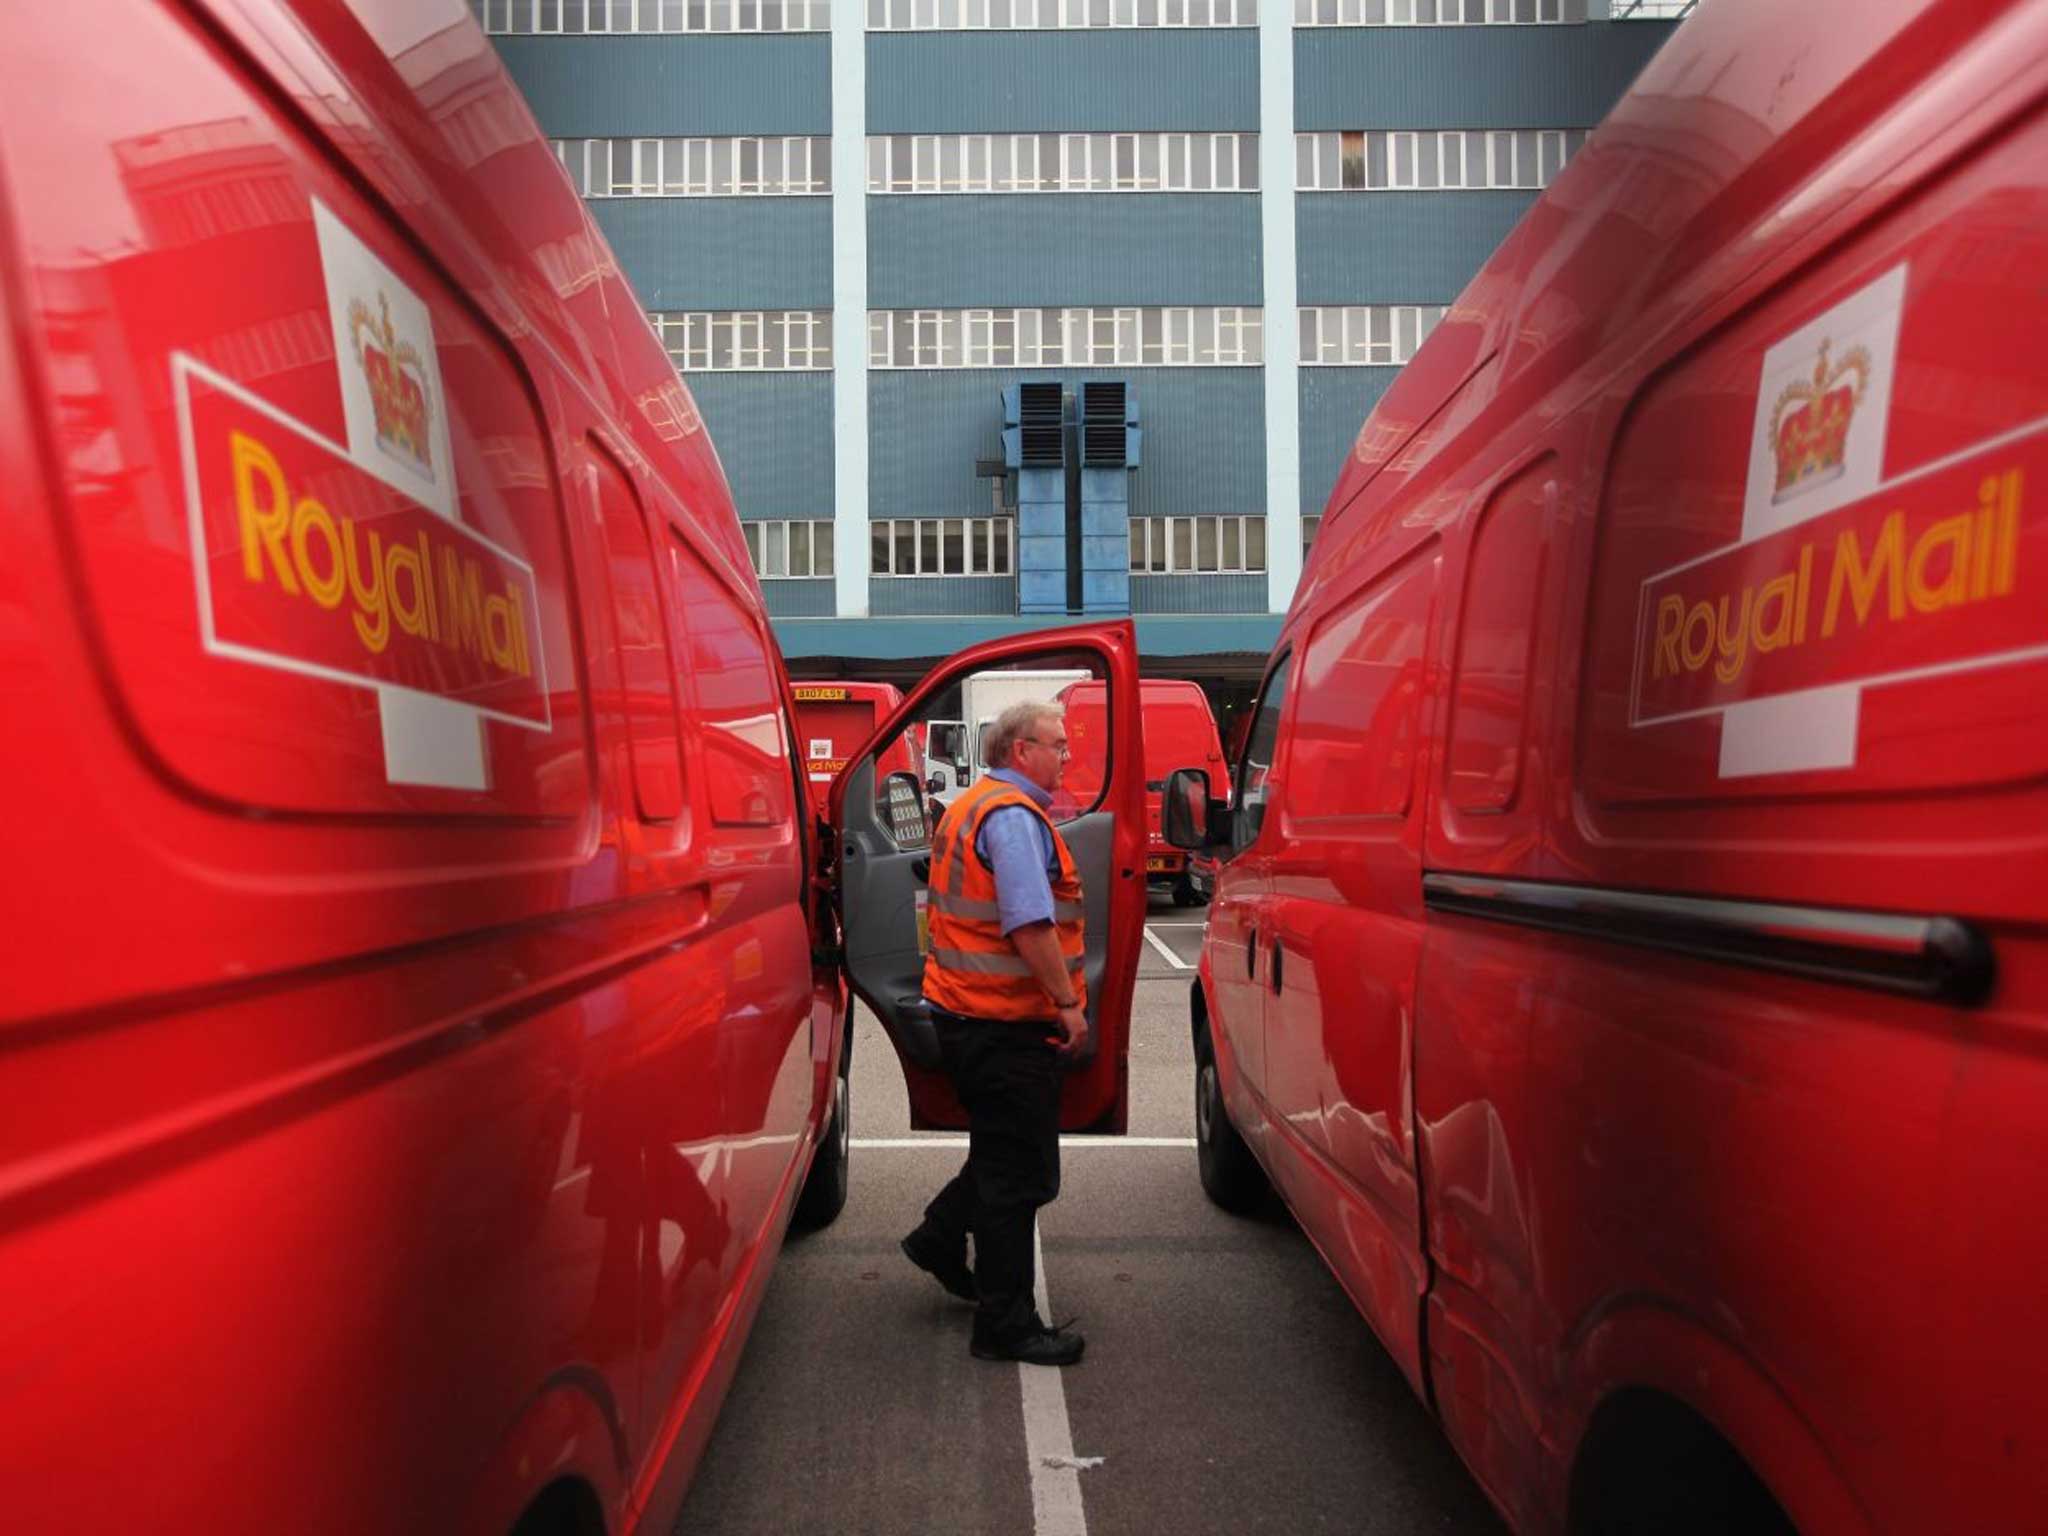 Ofcom alleges that changes made by Royal Mail to 'access services' meant that higher access prices would be charged to competitors.